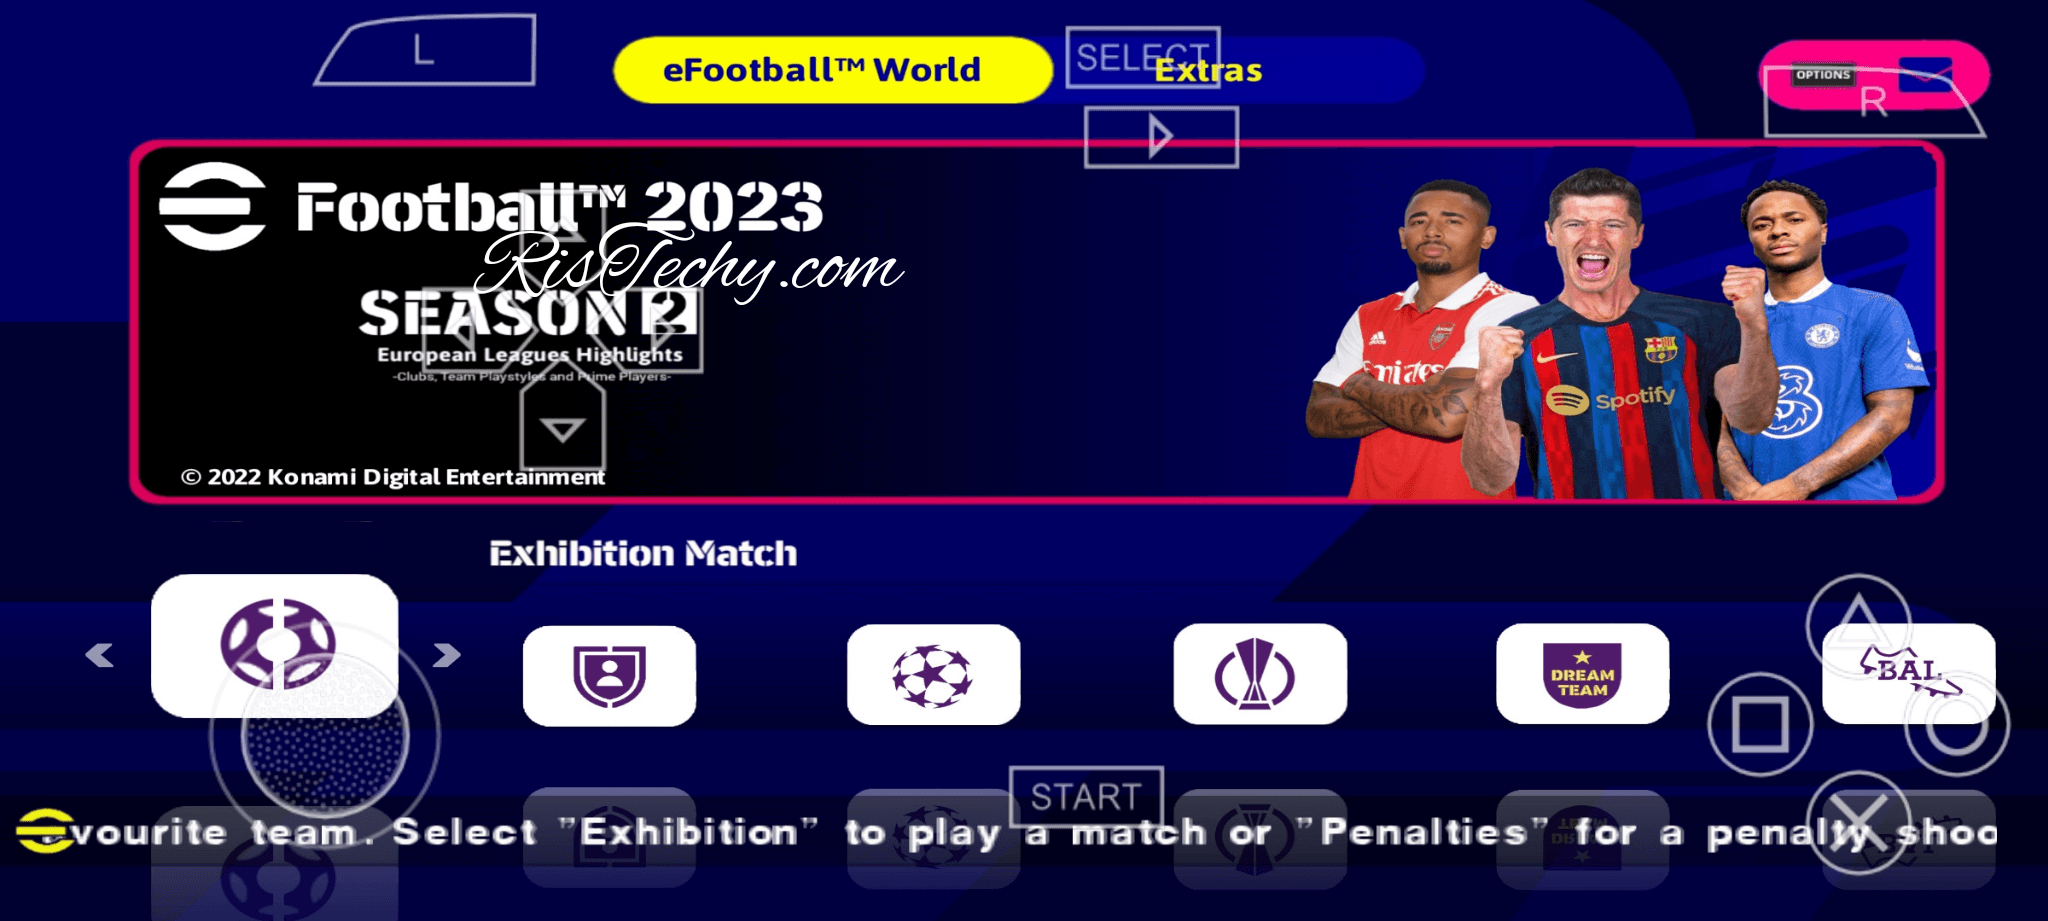 PES 2023 (eFootball) PPSSPP | PSP Iso PS5 Camera Download - Updated September, 2022